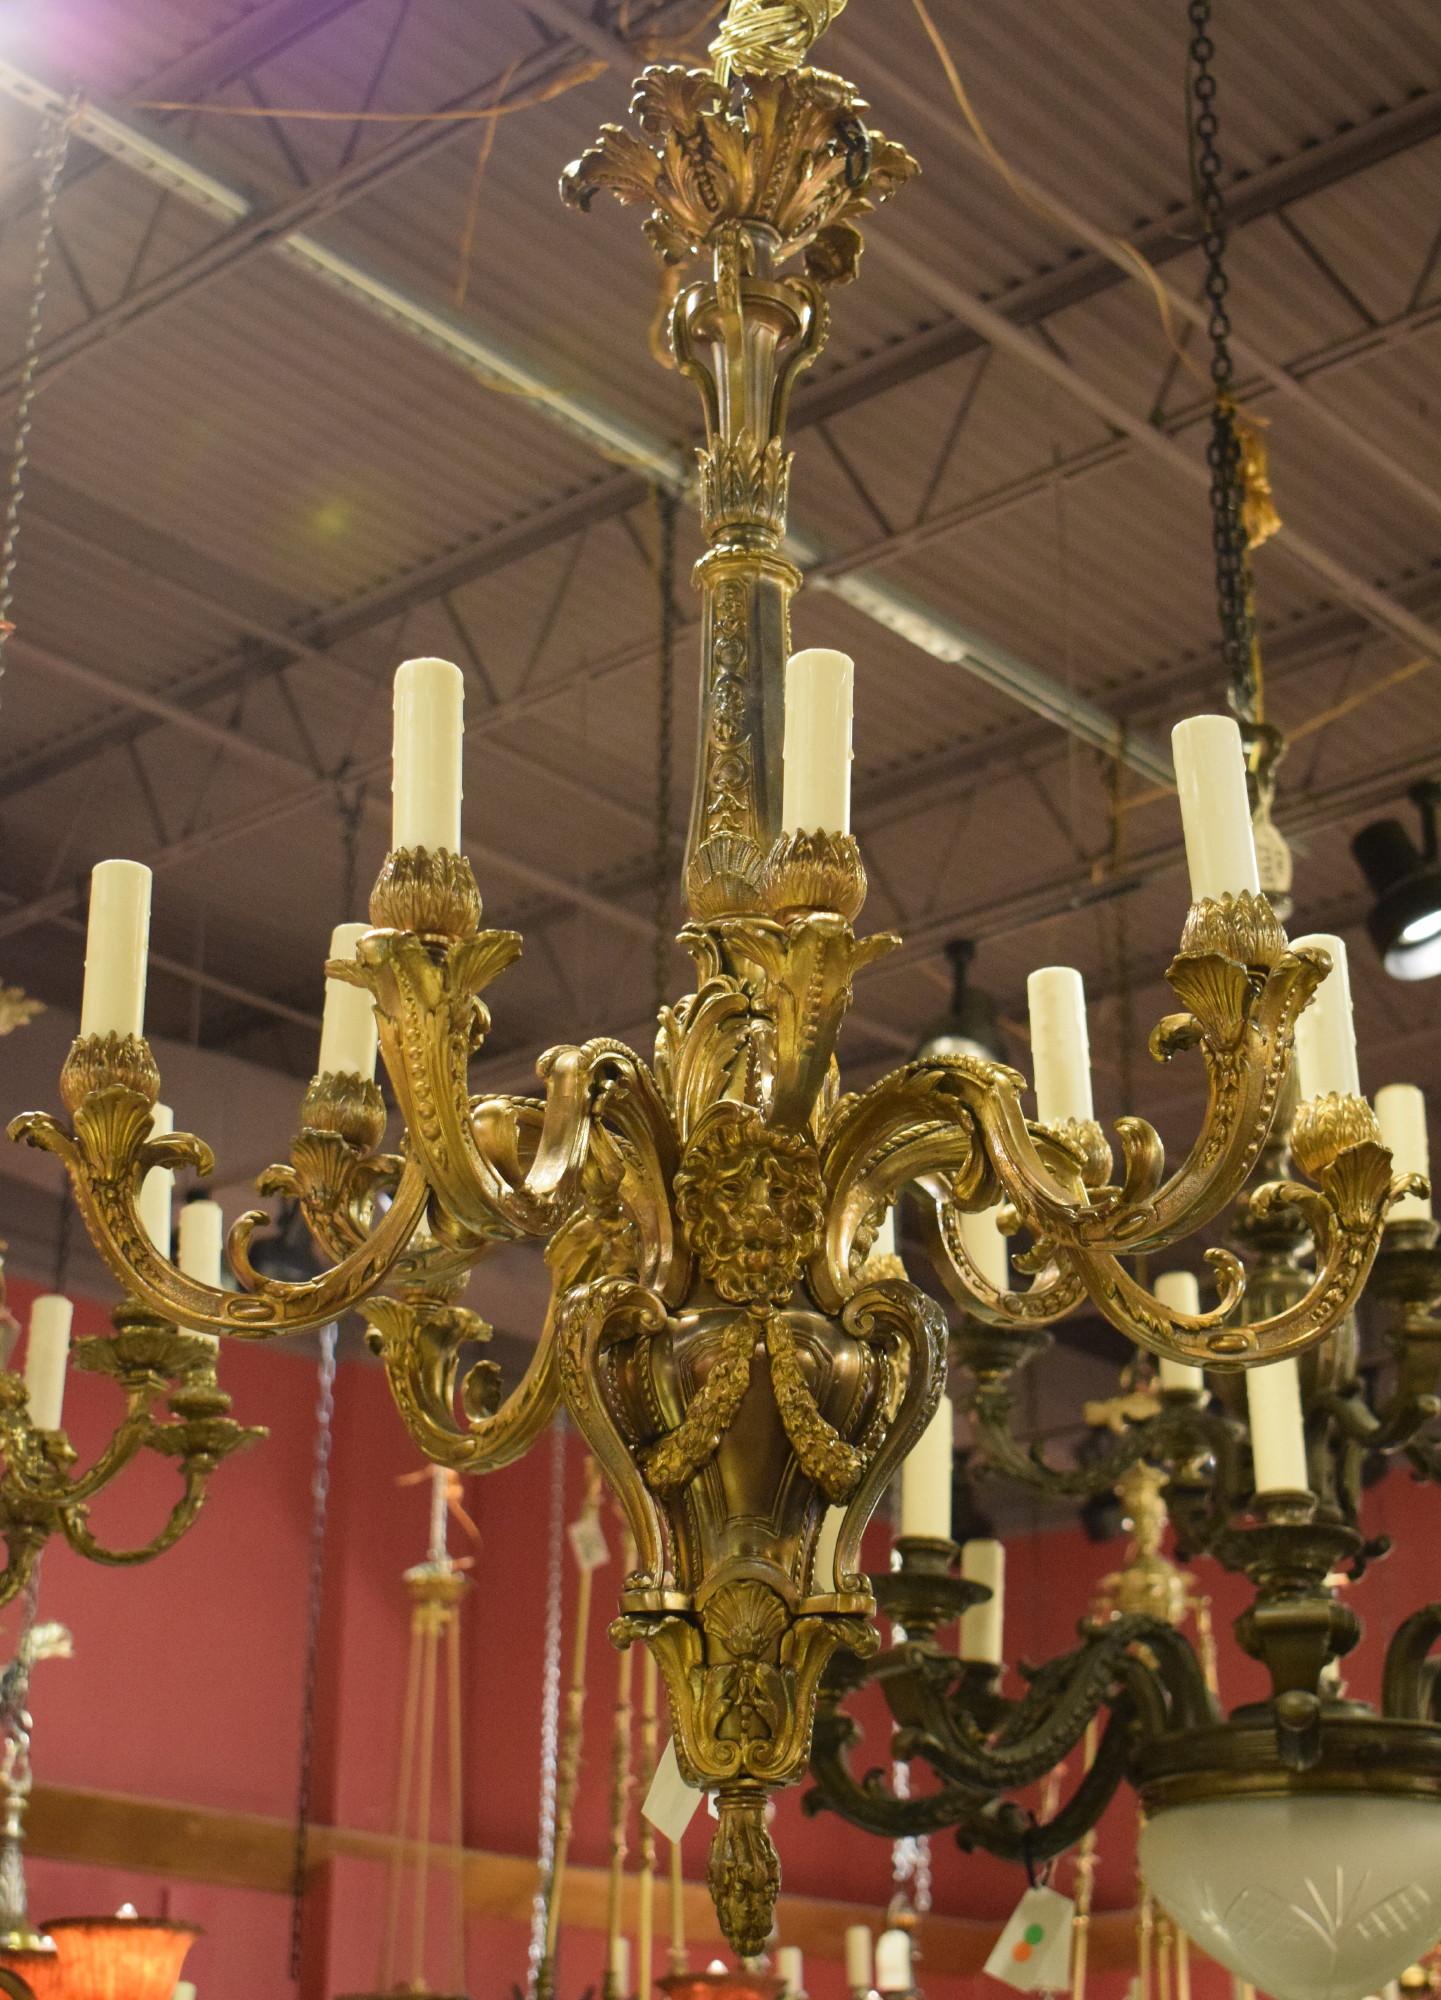 A very fine & elegant gilt bronze chandelier. Superb chasing. France, circa 1900.
Dimensions: Height 40